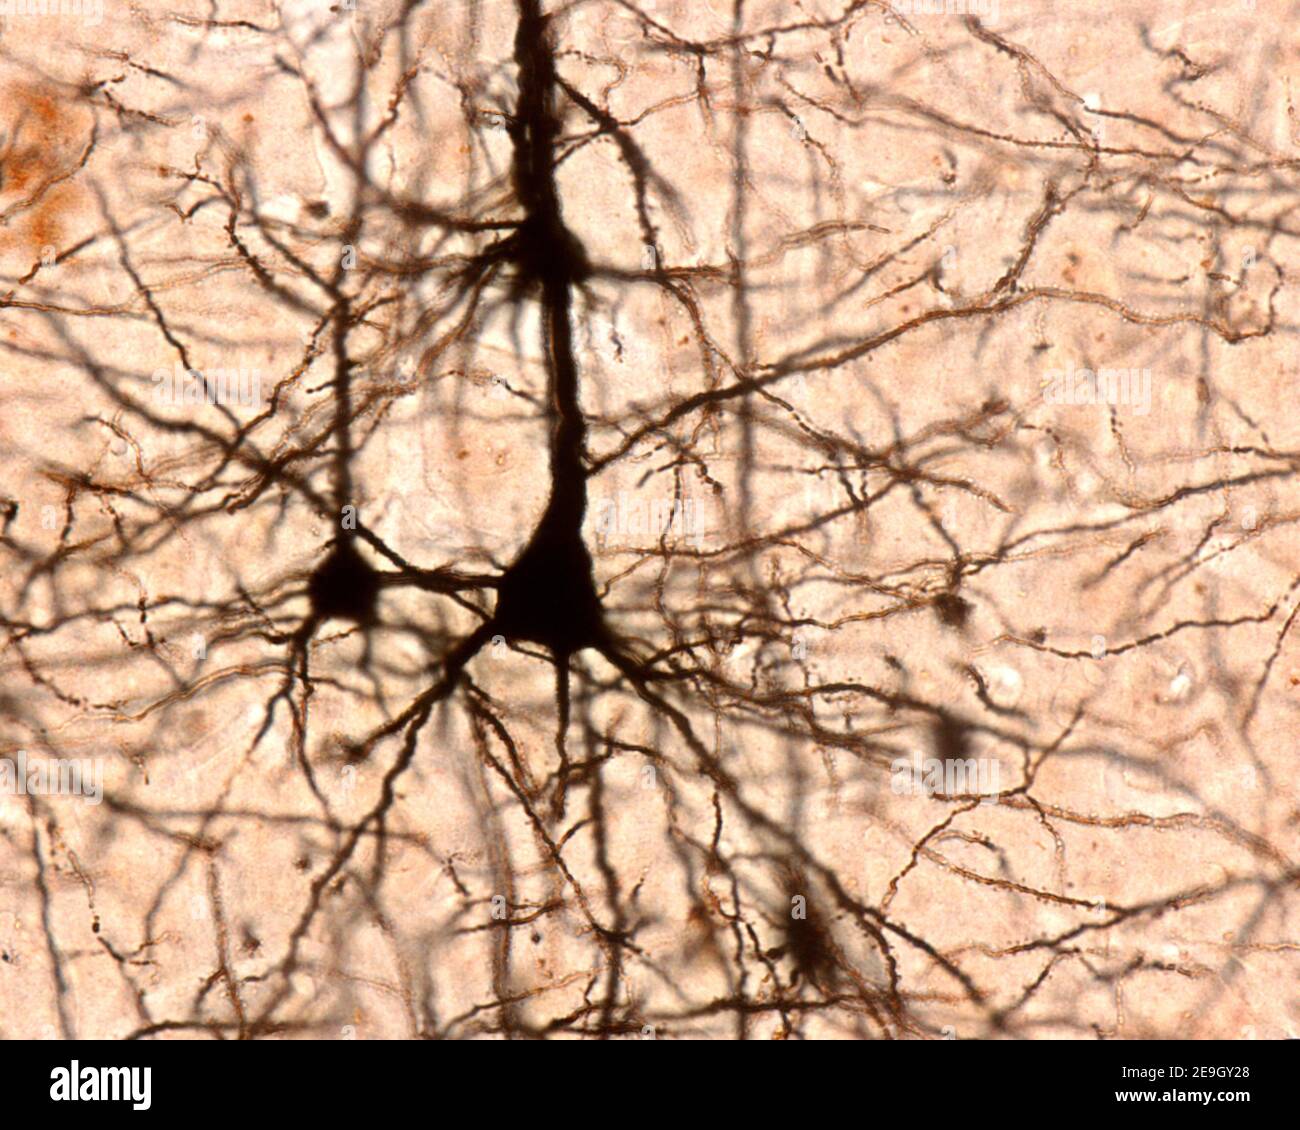 Pyramidal neurons of the cerebral cortex. Golgi’s silver chromate. From the conic shaped soma, a large apical dendrite and multiple basilar dendrites Stock Photo